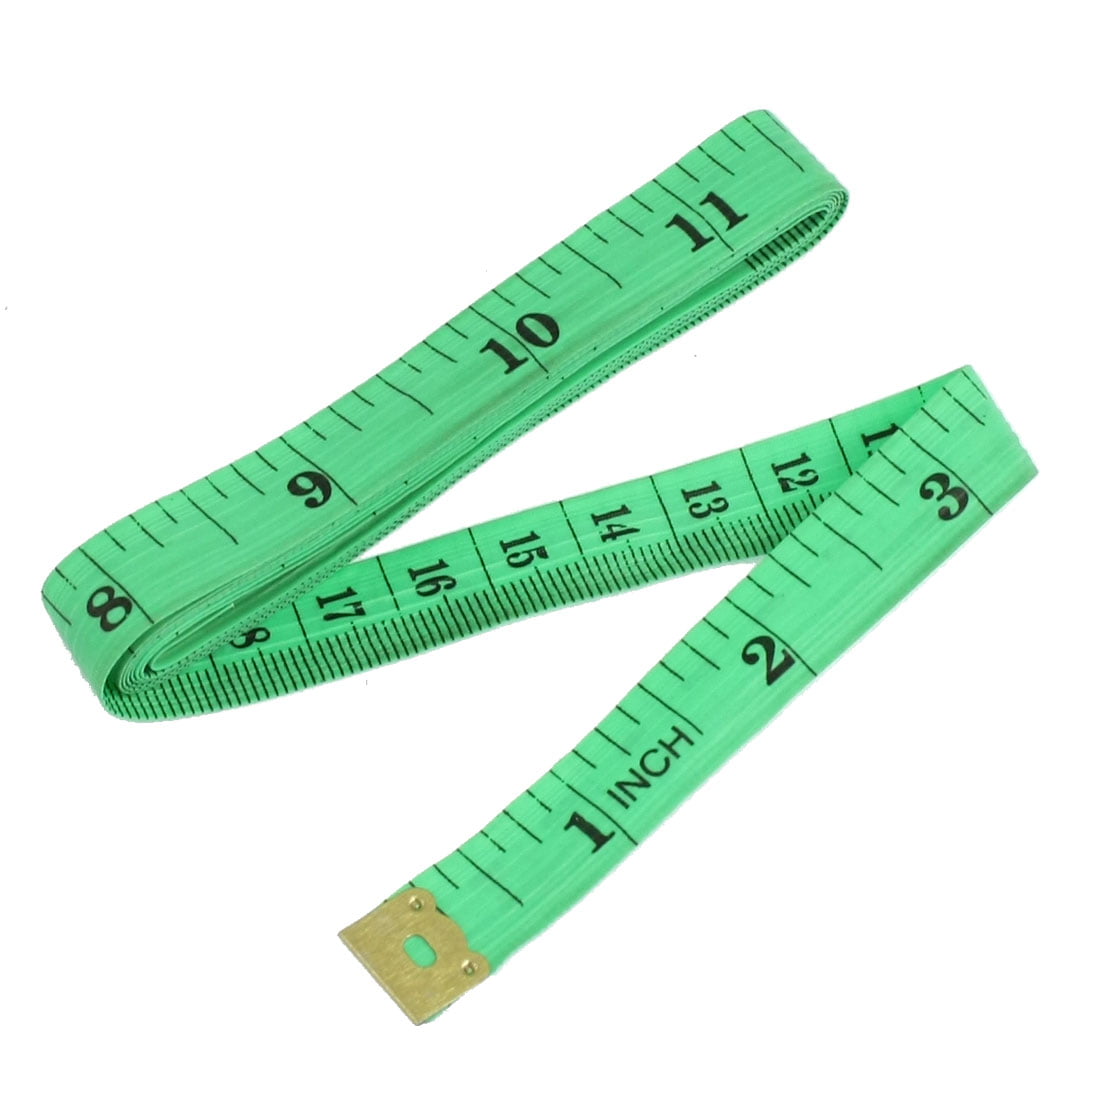 1.5M 60" Double Sided Fiberglass Tape Measure Sewing Rulers 5 Pieces 